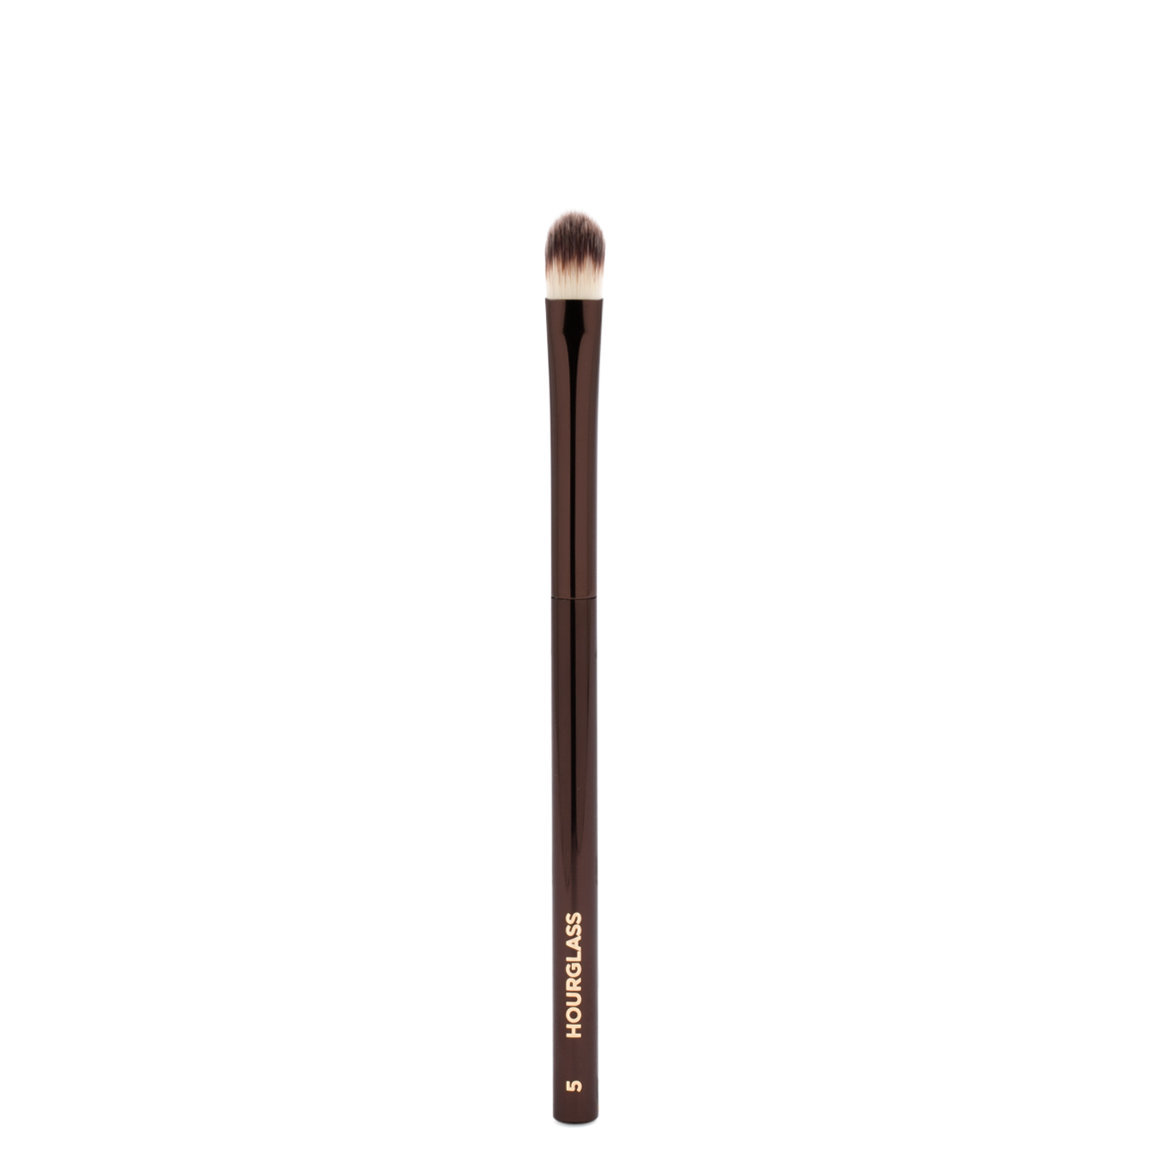 Hourglass N° 5 Concealer Brush alternative view 1 - product swatch.